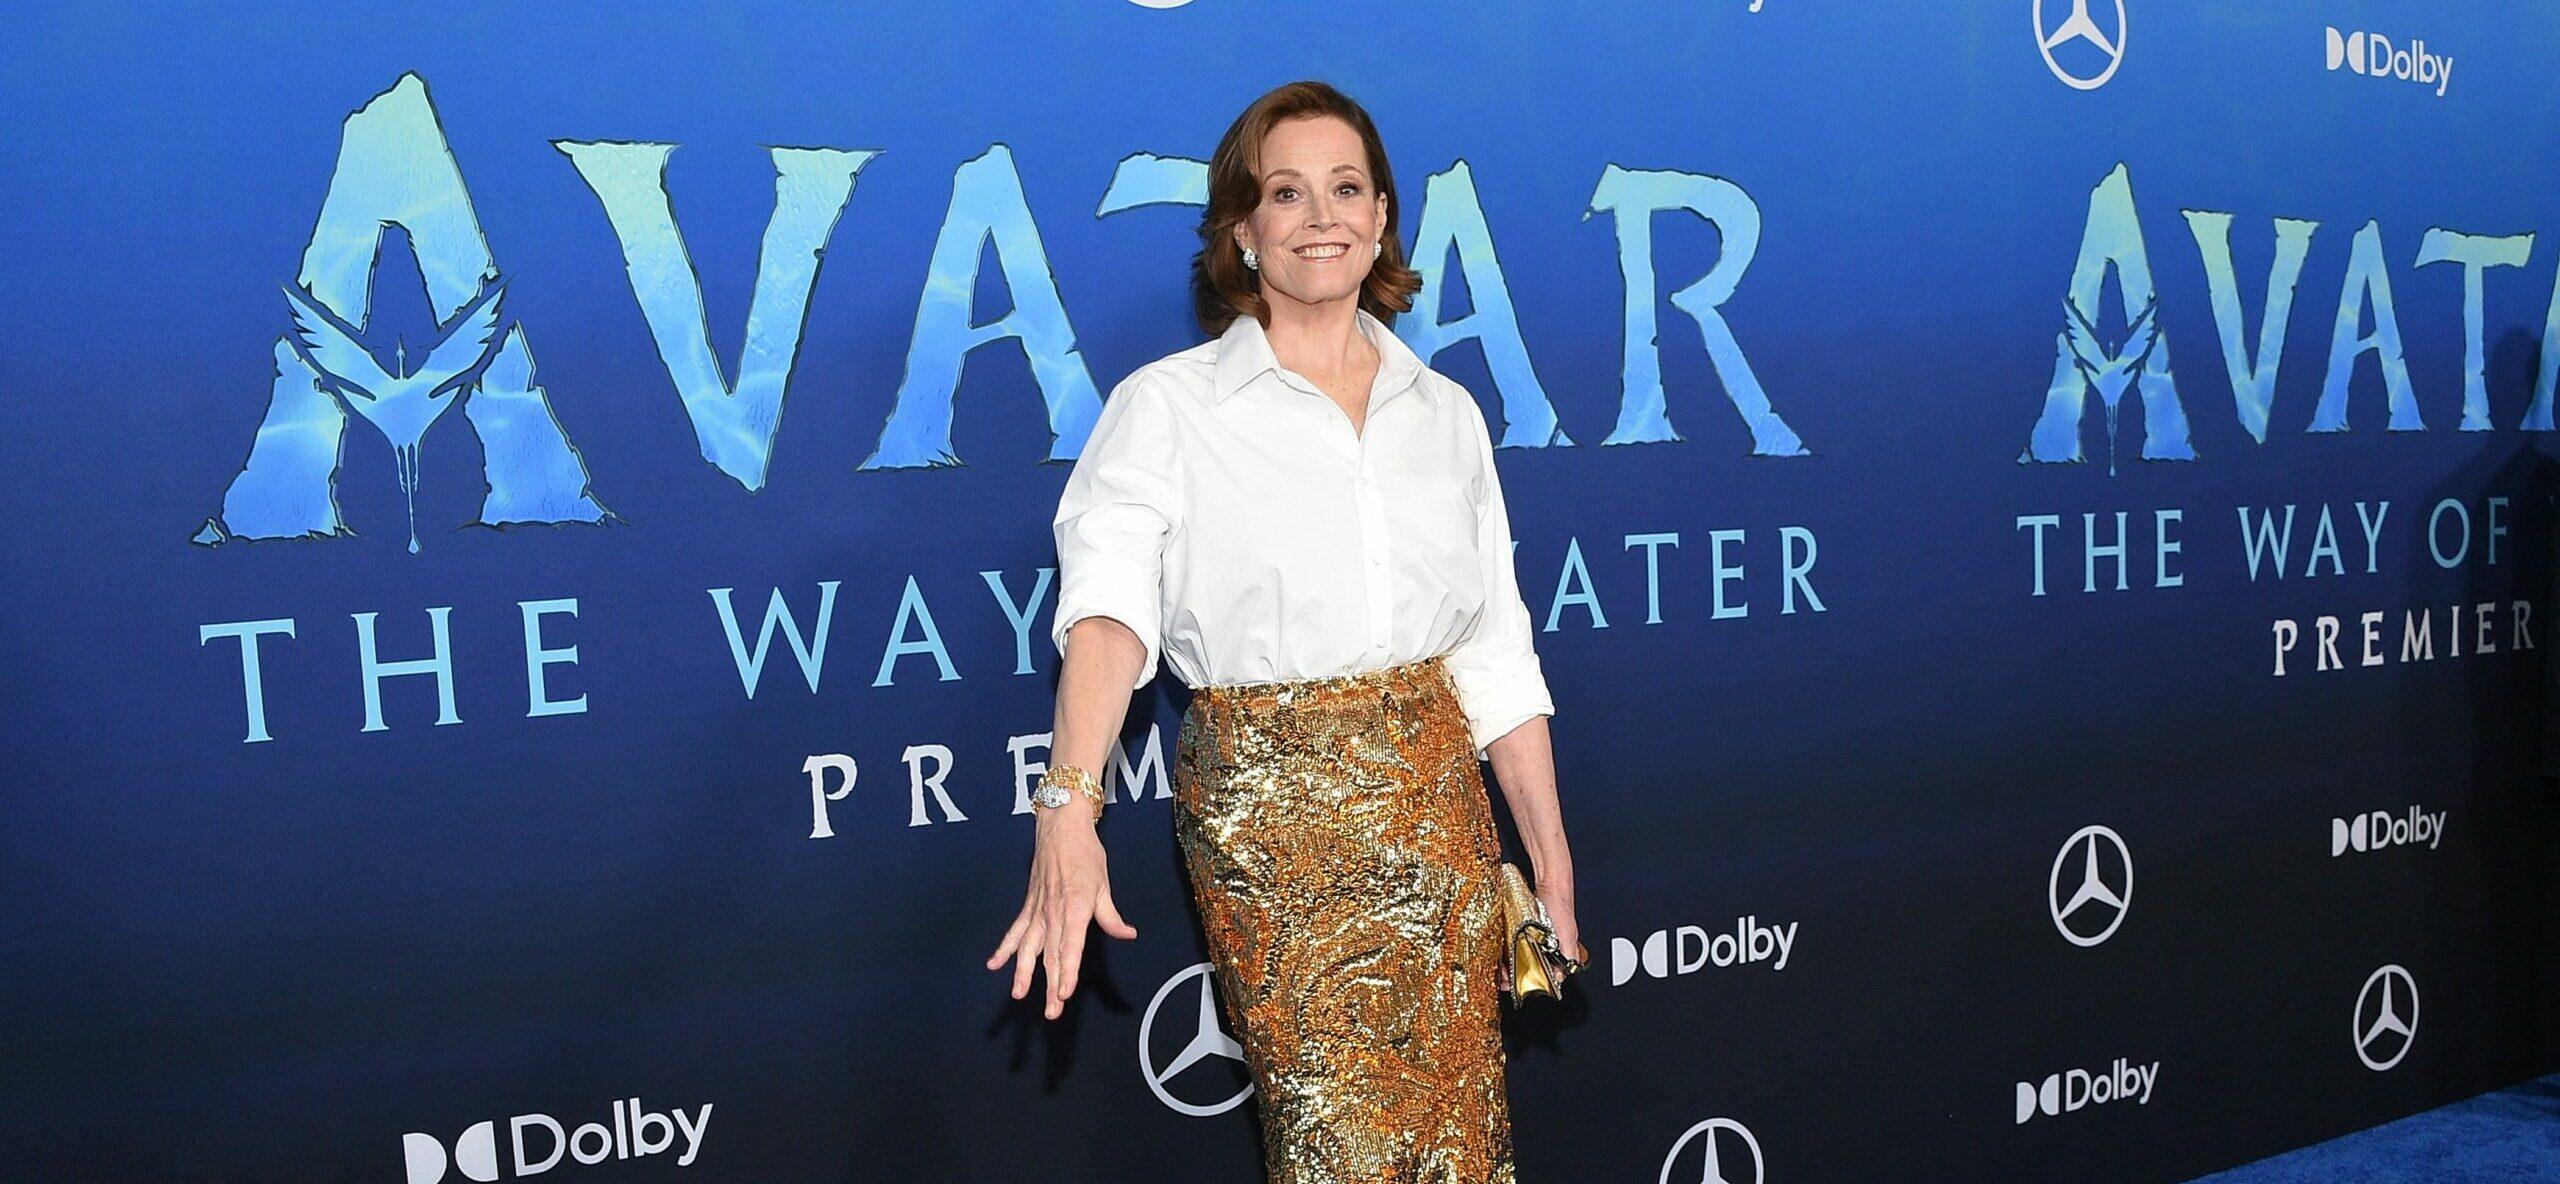 Avatar: The Way of Water Premiere